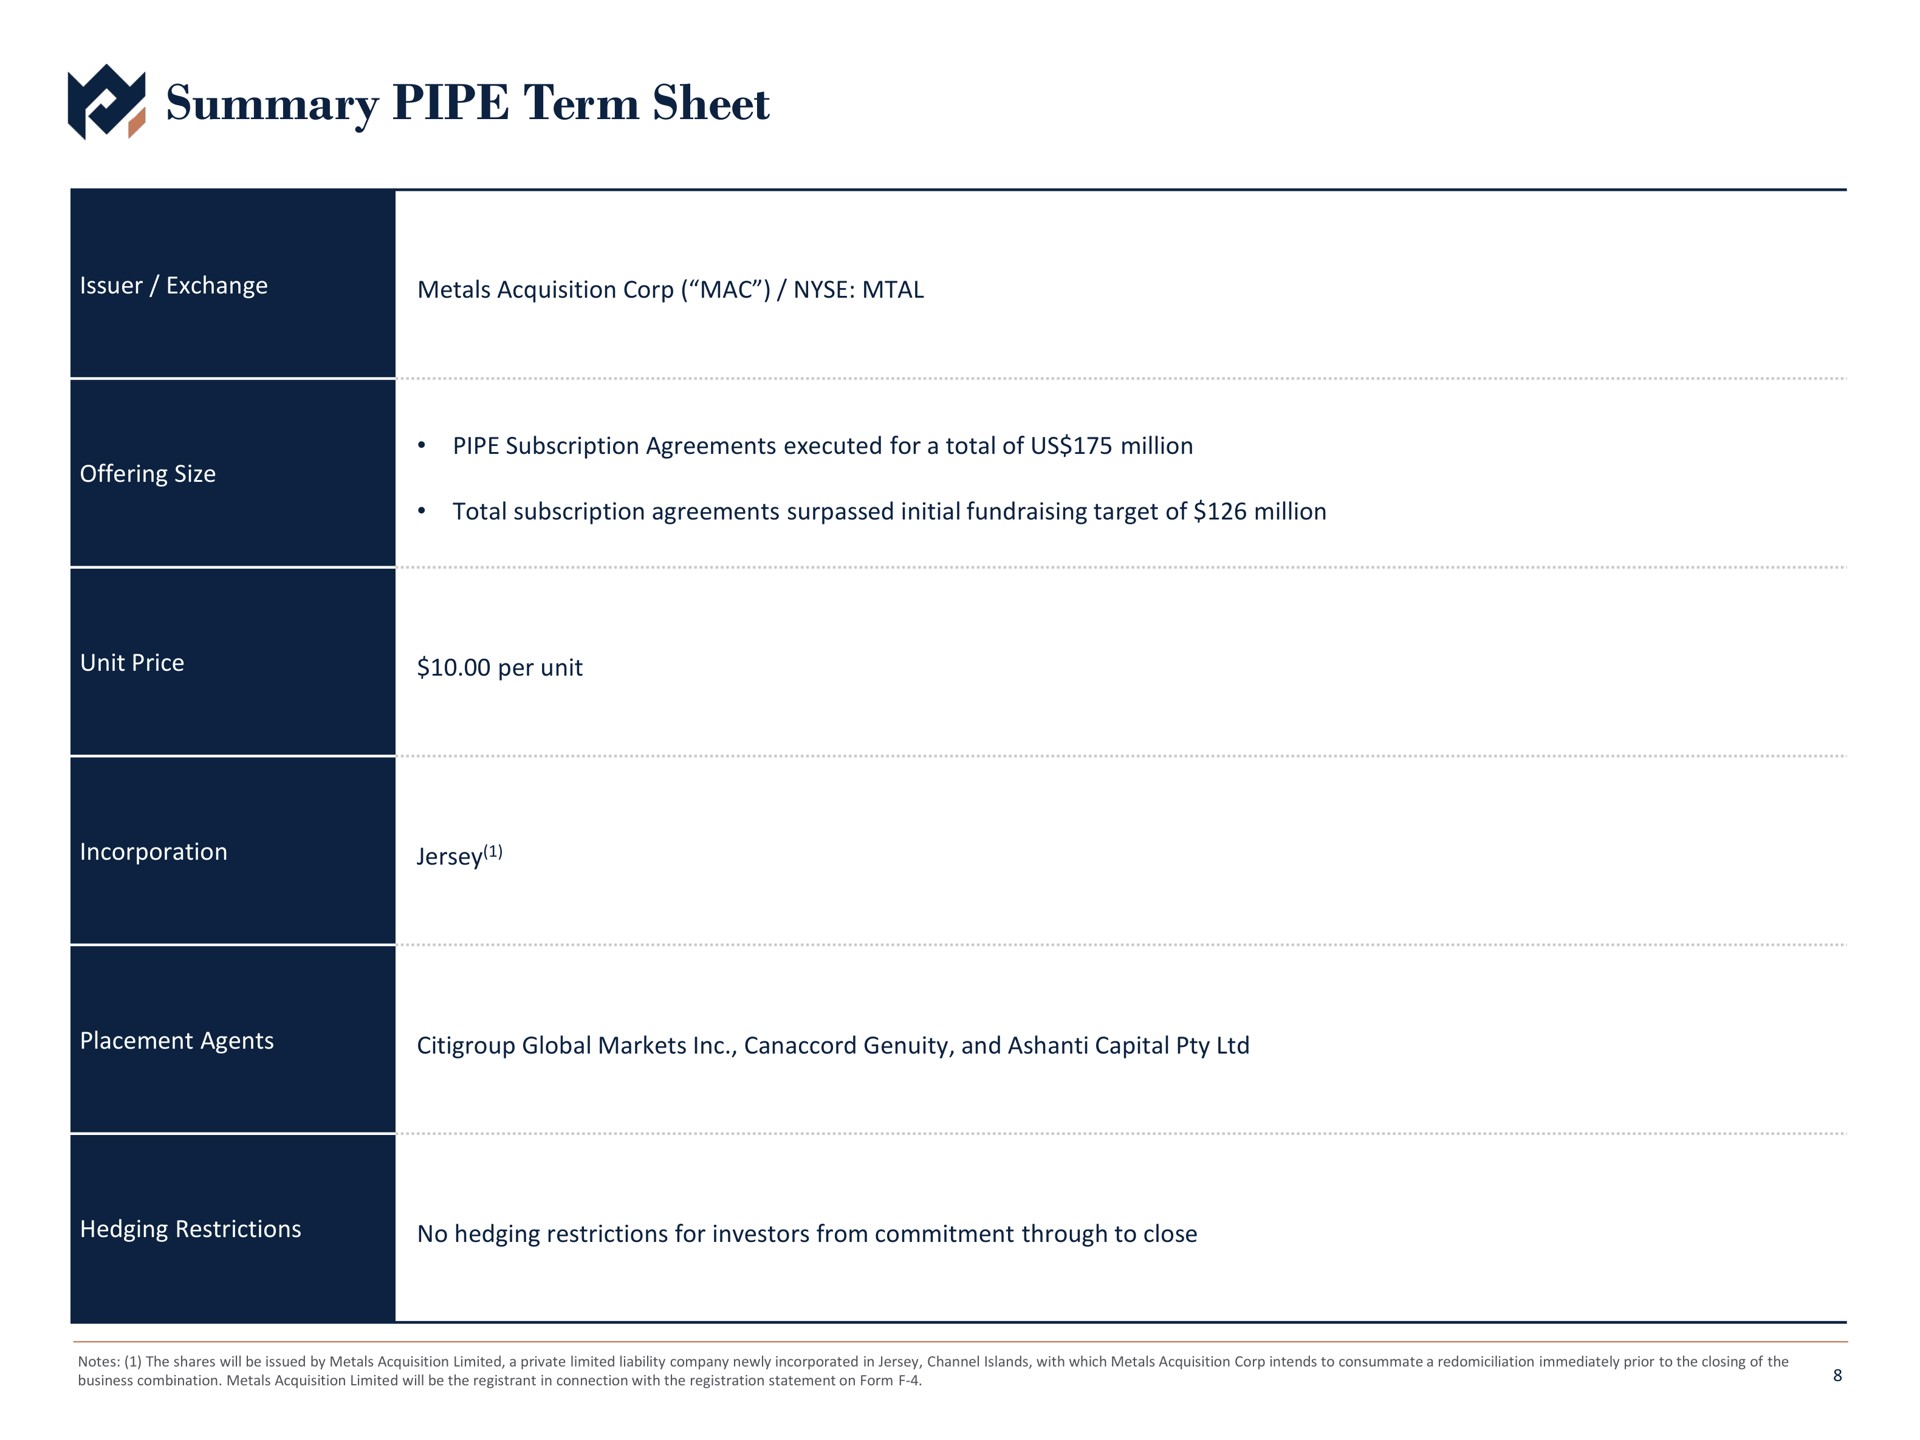 summary pipe term sheet | Metals Acquisition Corp